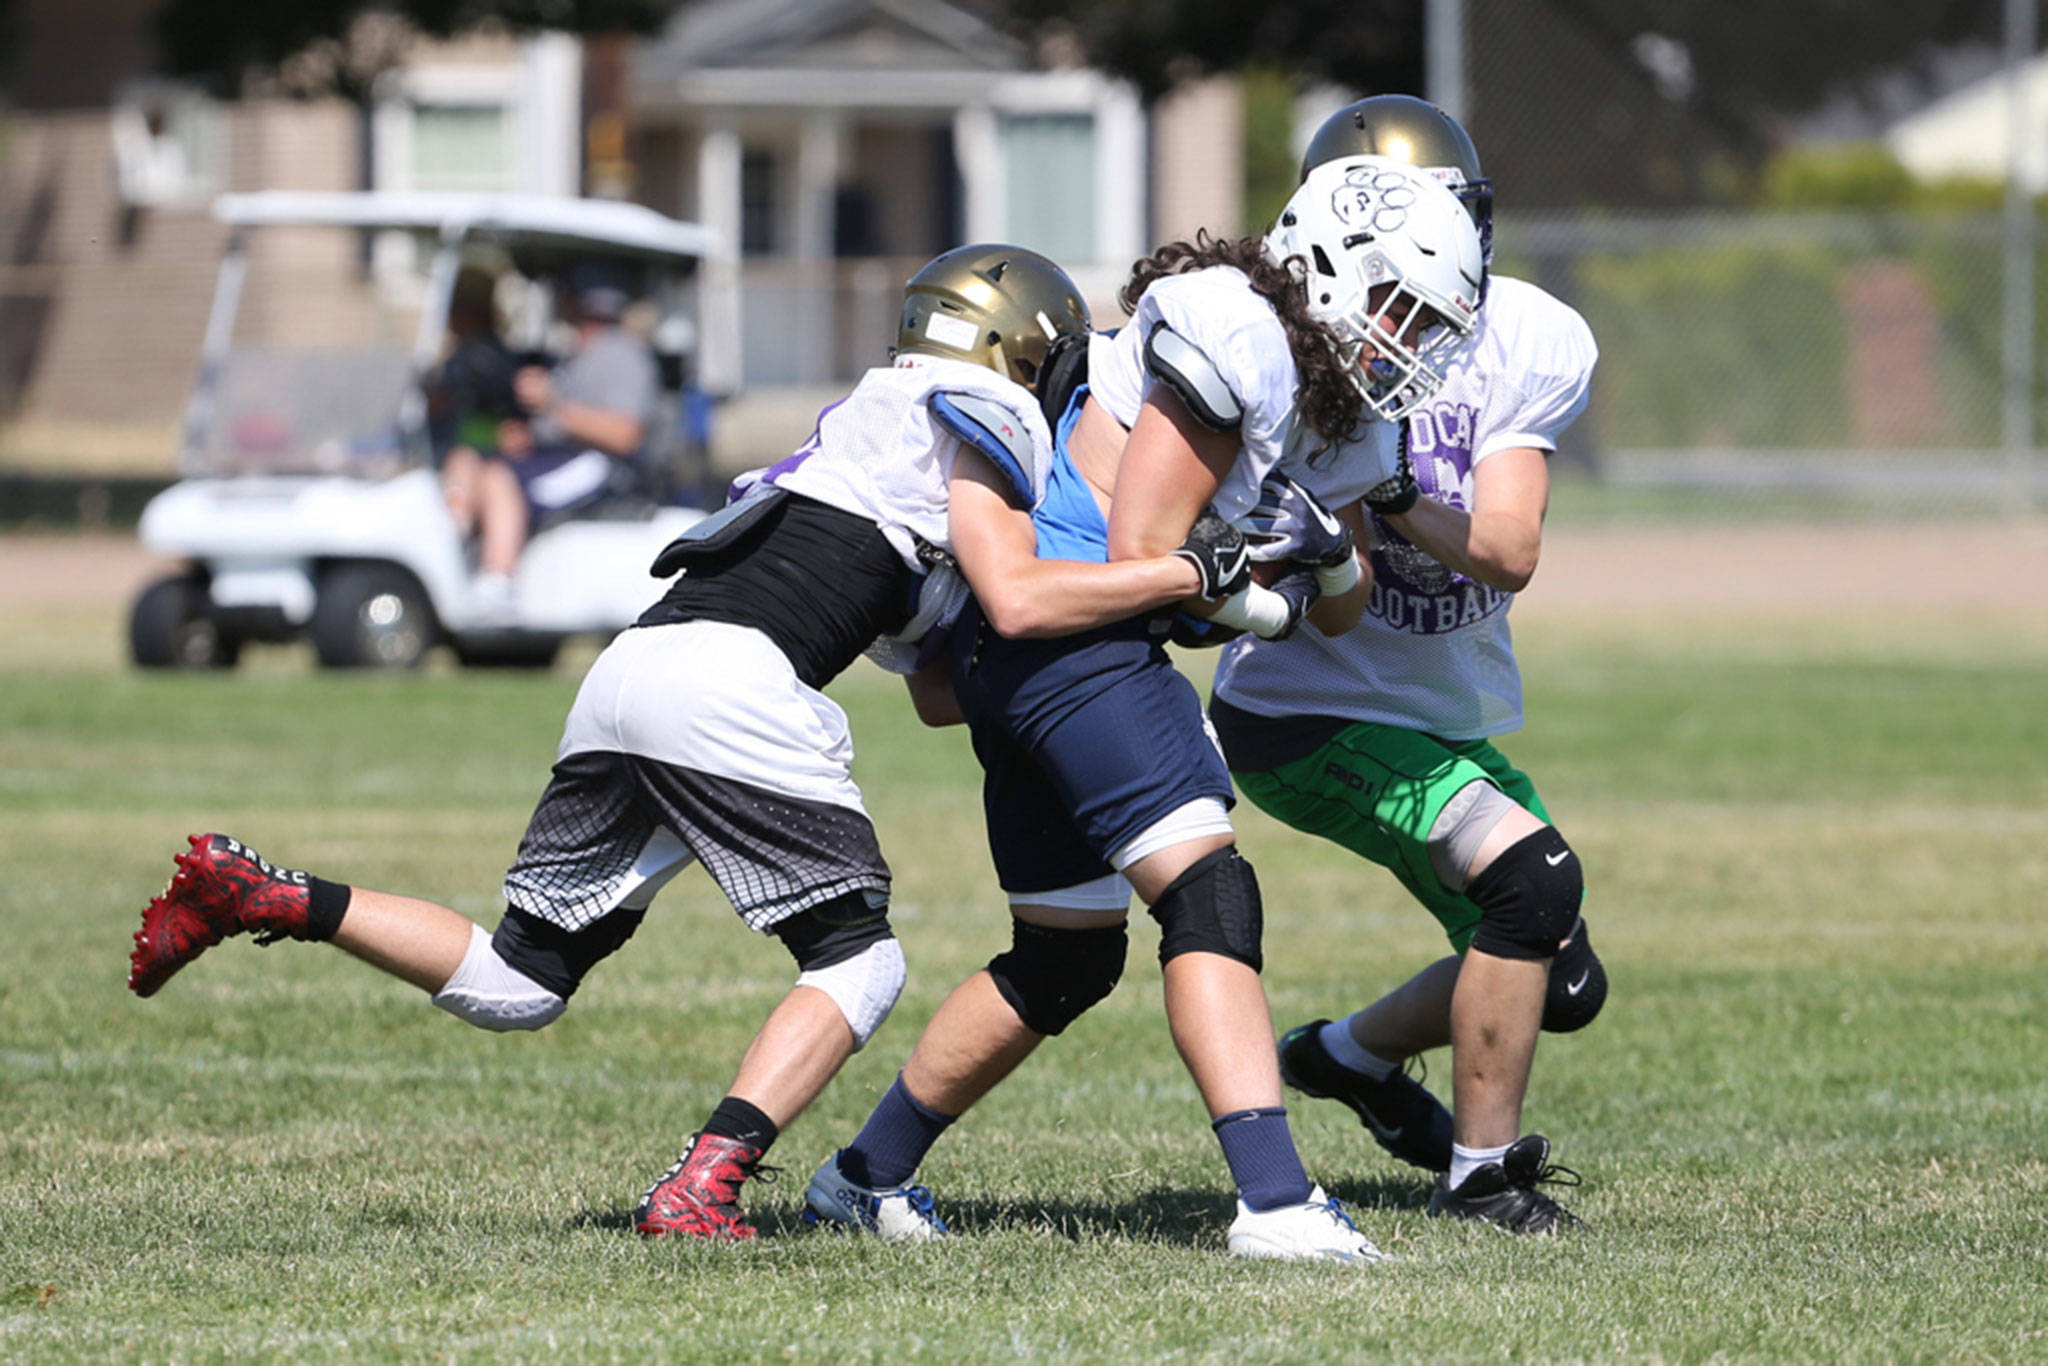 Two Wildcats bring down an opposing running back during a scrimmage Monday at the Wenatchee team camp. (Photo by John Fisken)